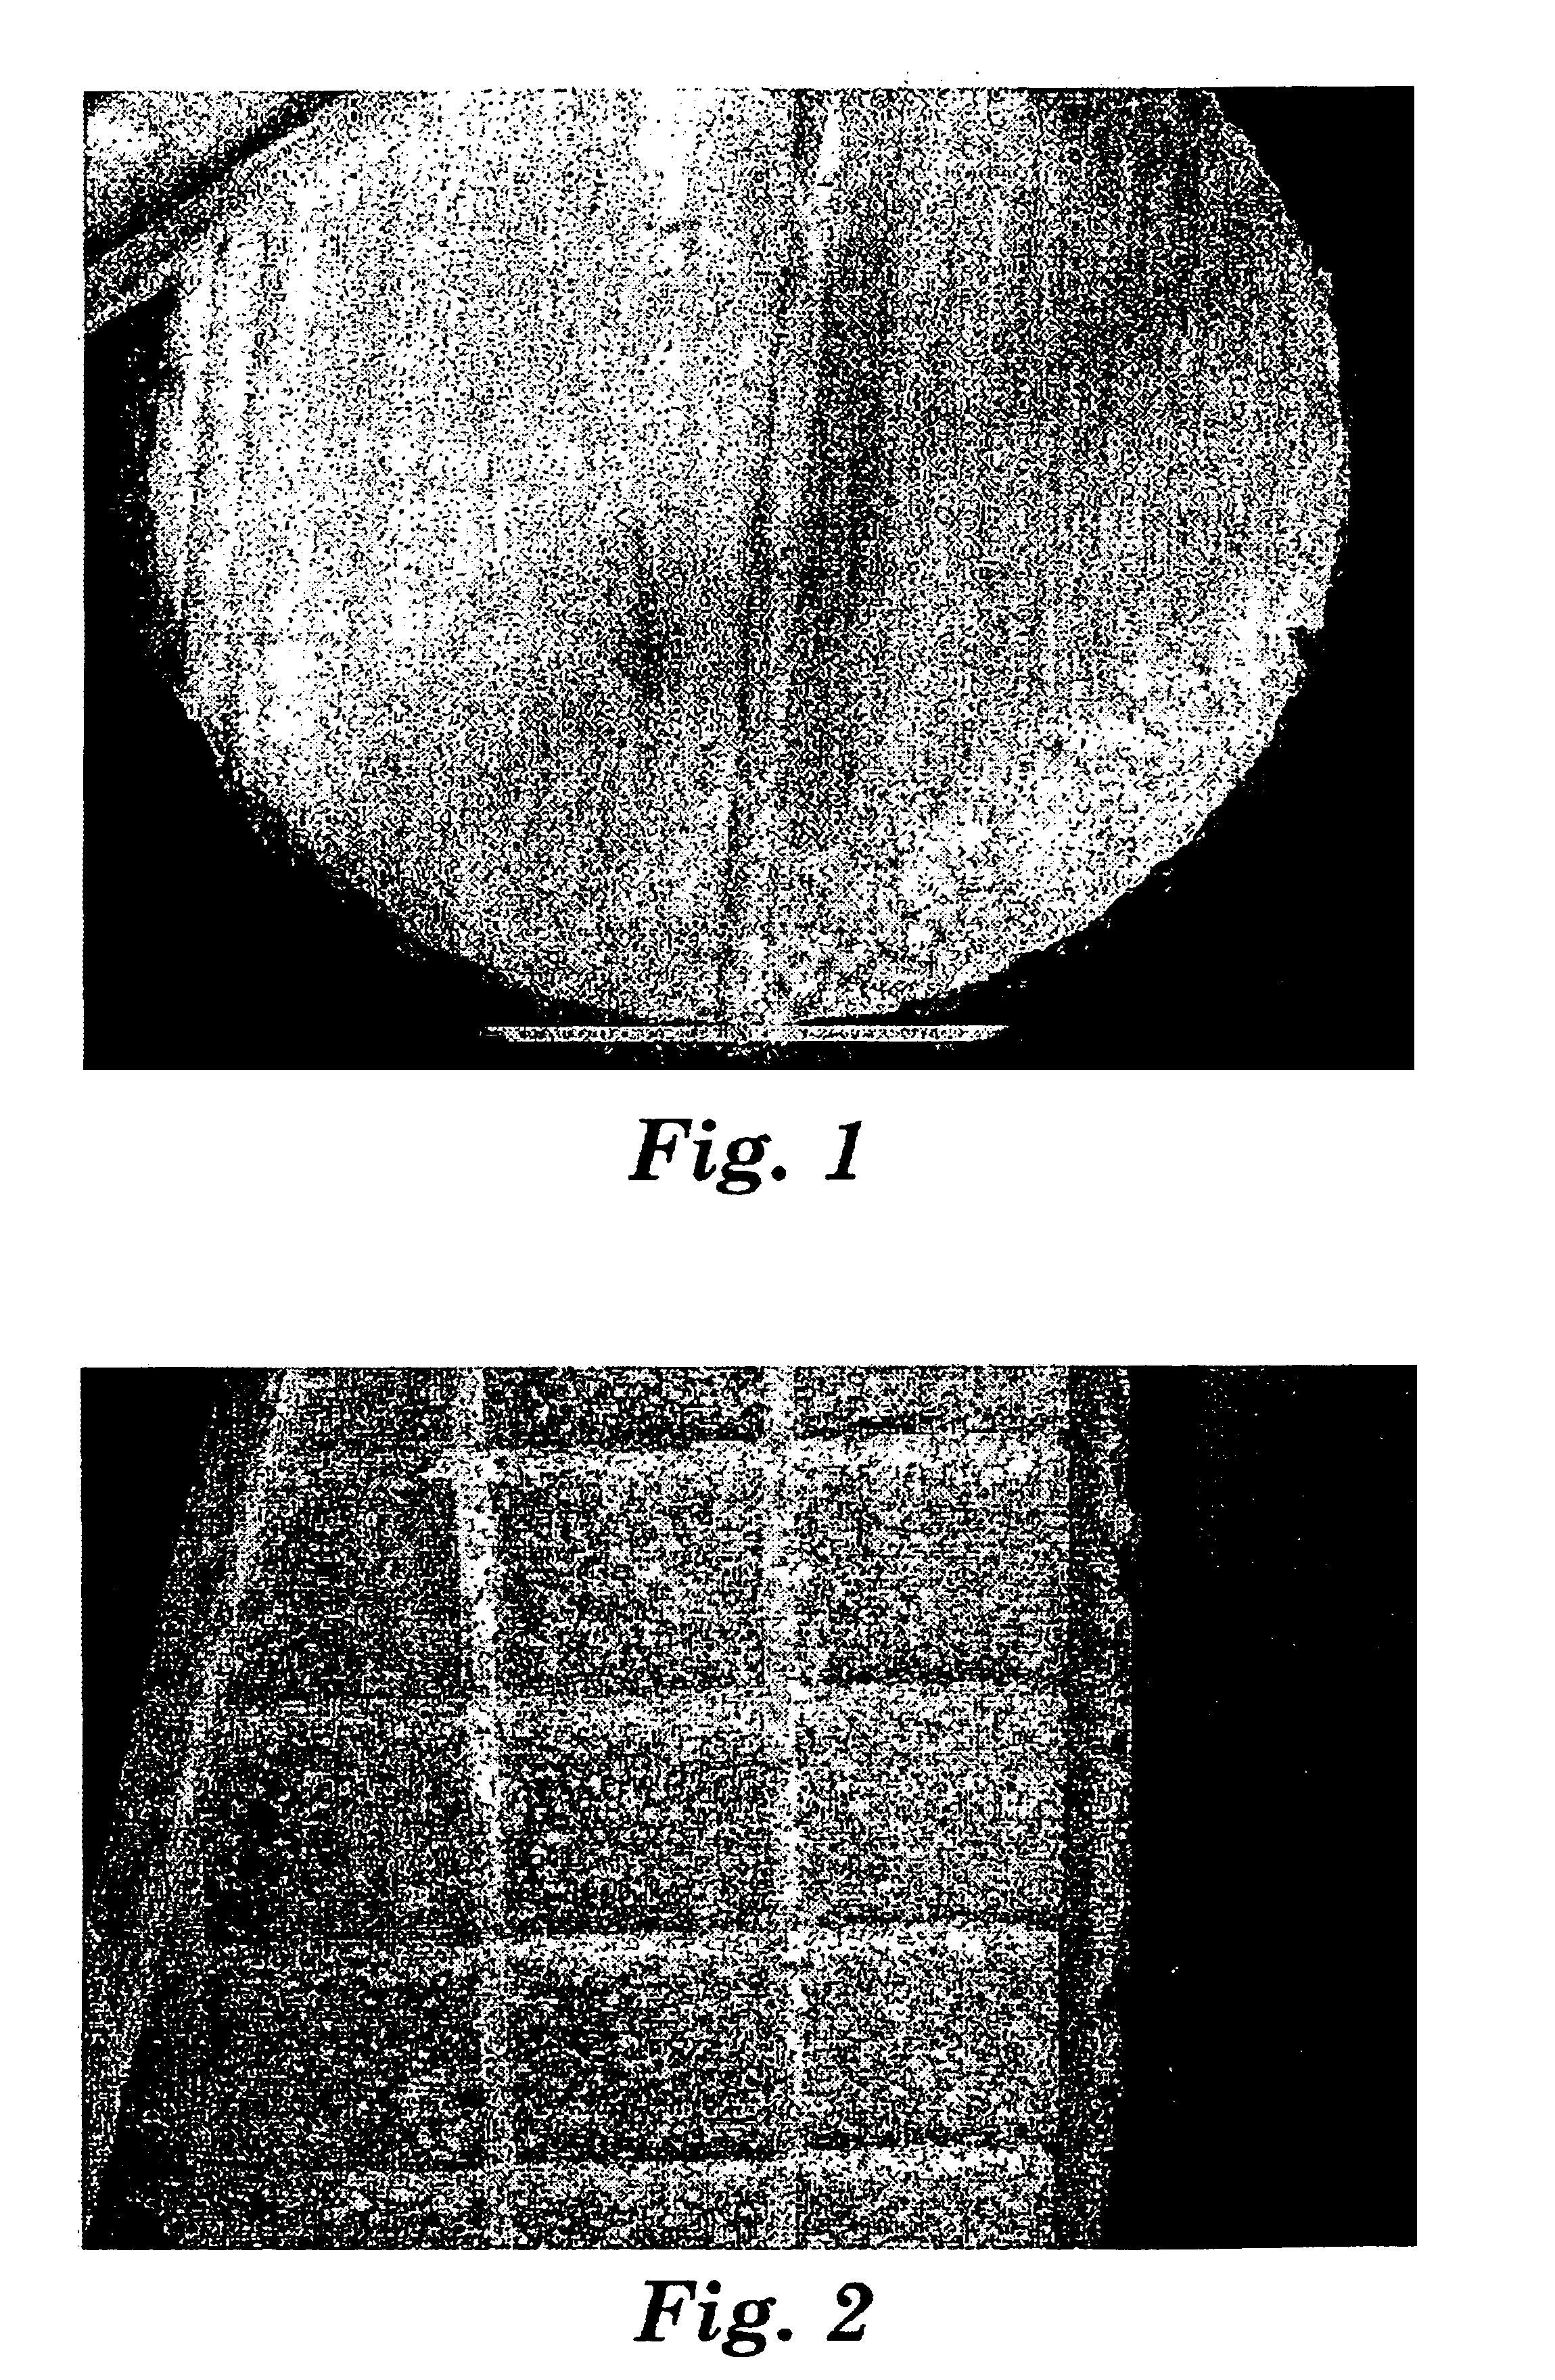 Method of detecting wear on a substrate using a fluorescent indicator